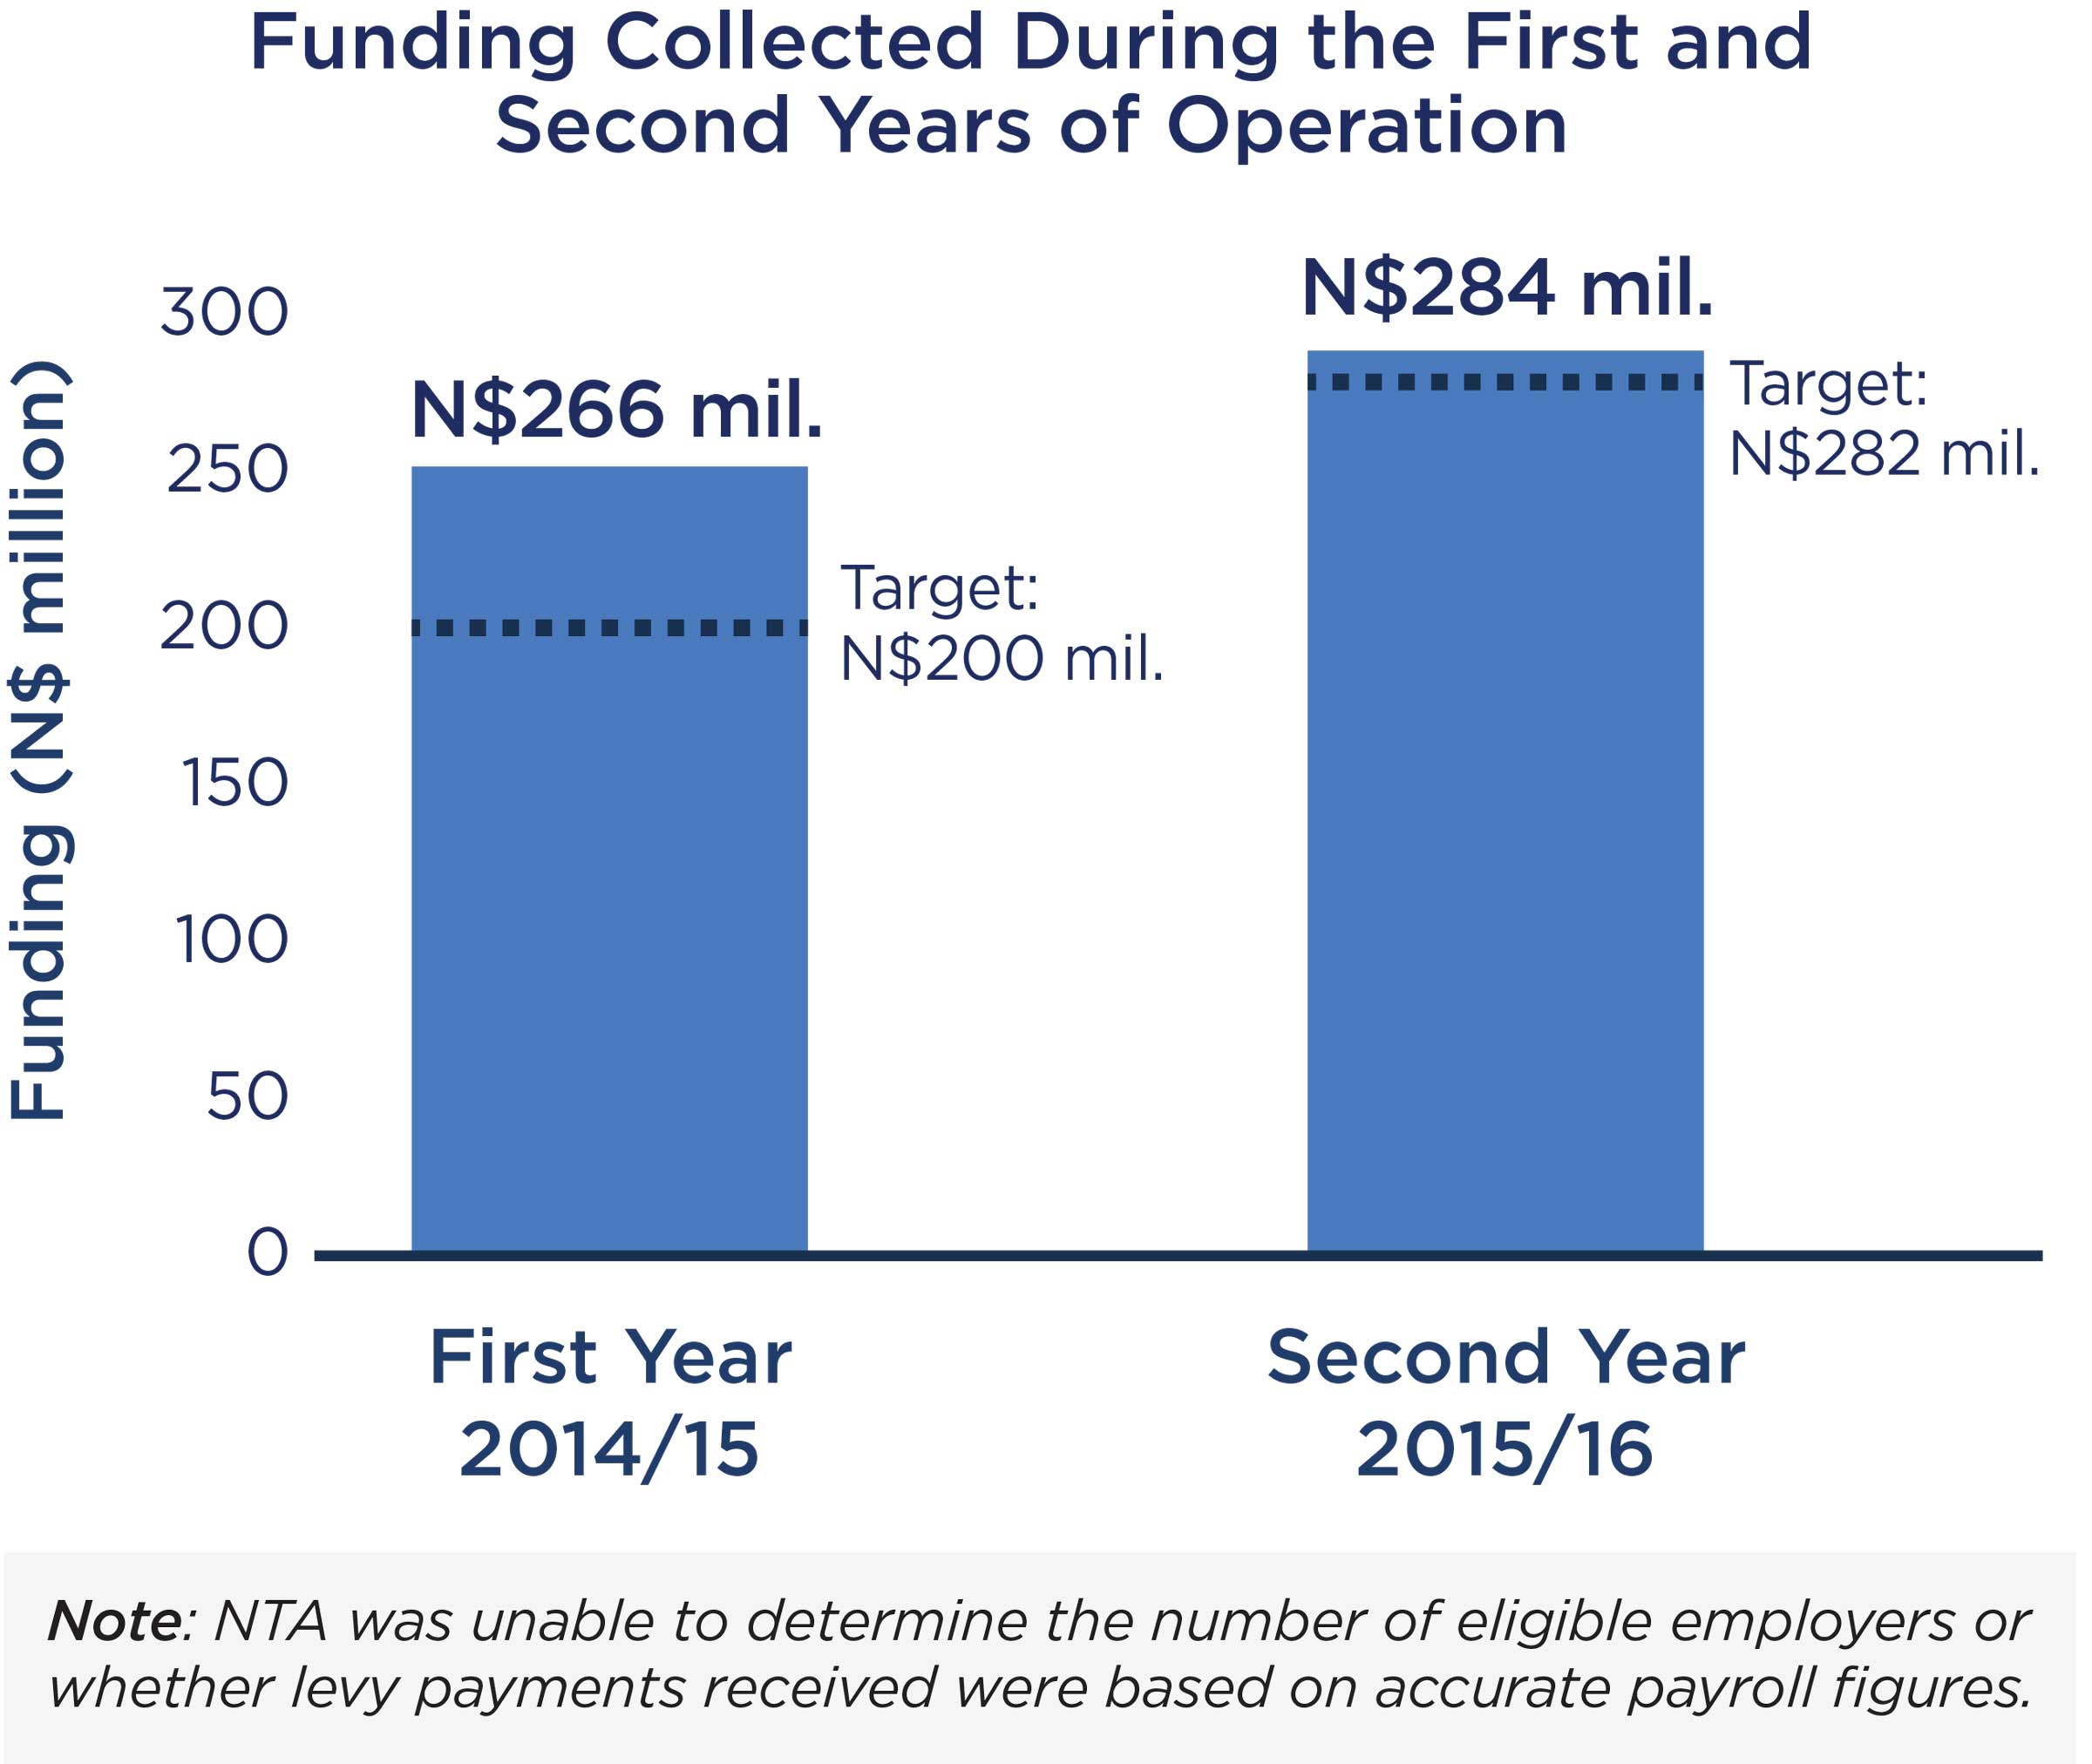 Funding Collected During the First and Second Years of NTF Operation